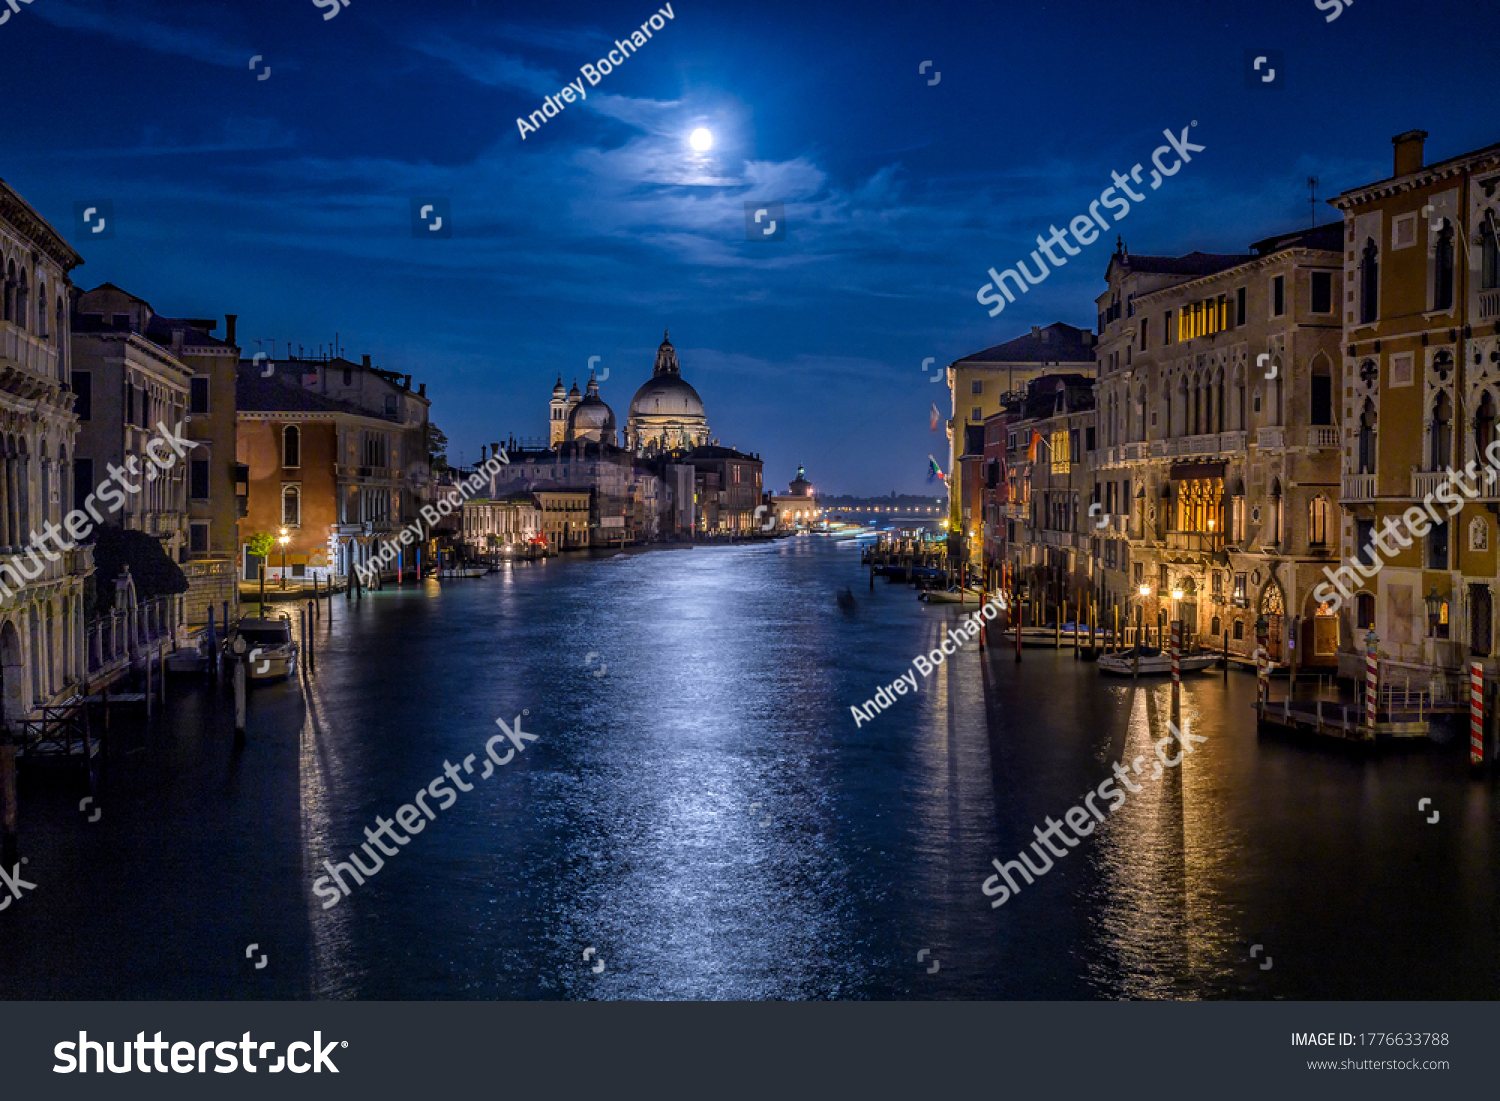 Moon night over Grand canal in Venic #1776633788